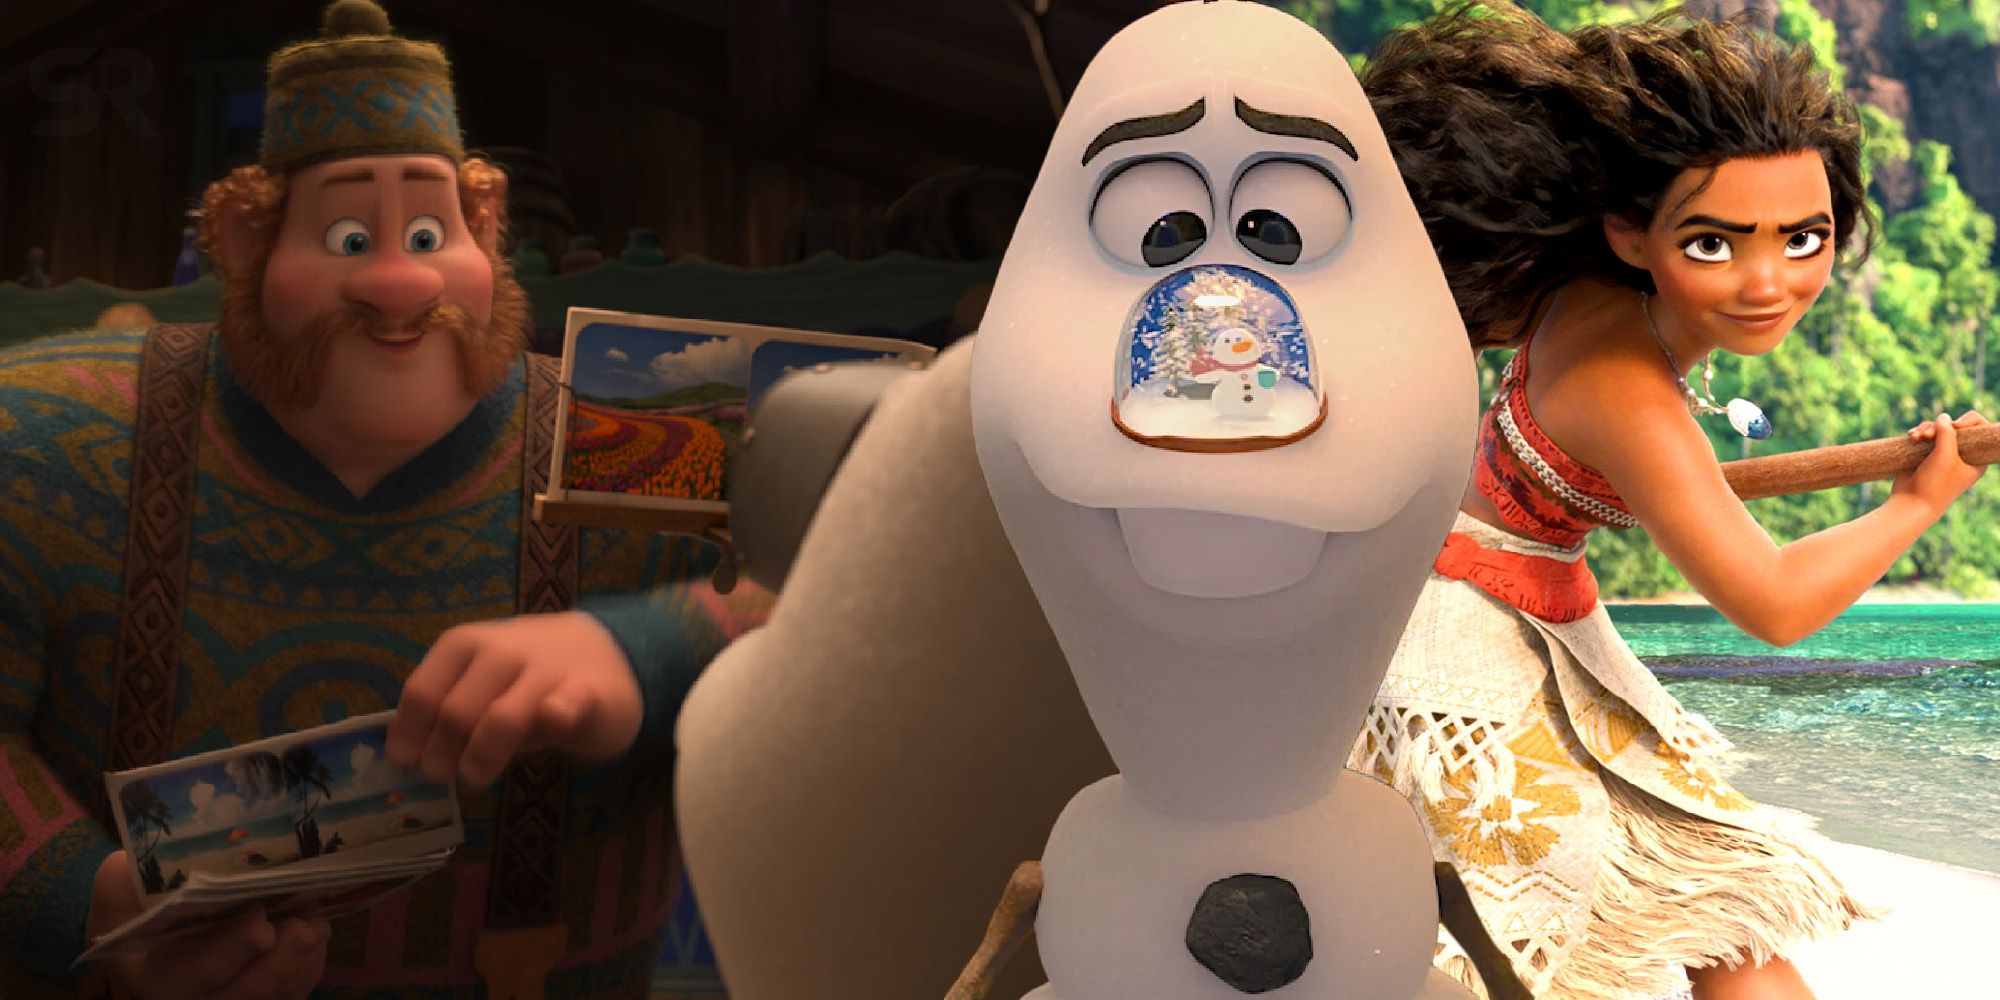 Frozen' Olaf Gets Full Origin Story in Disney+ 'Once Upon a Snowman